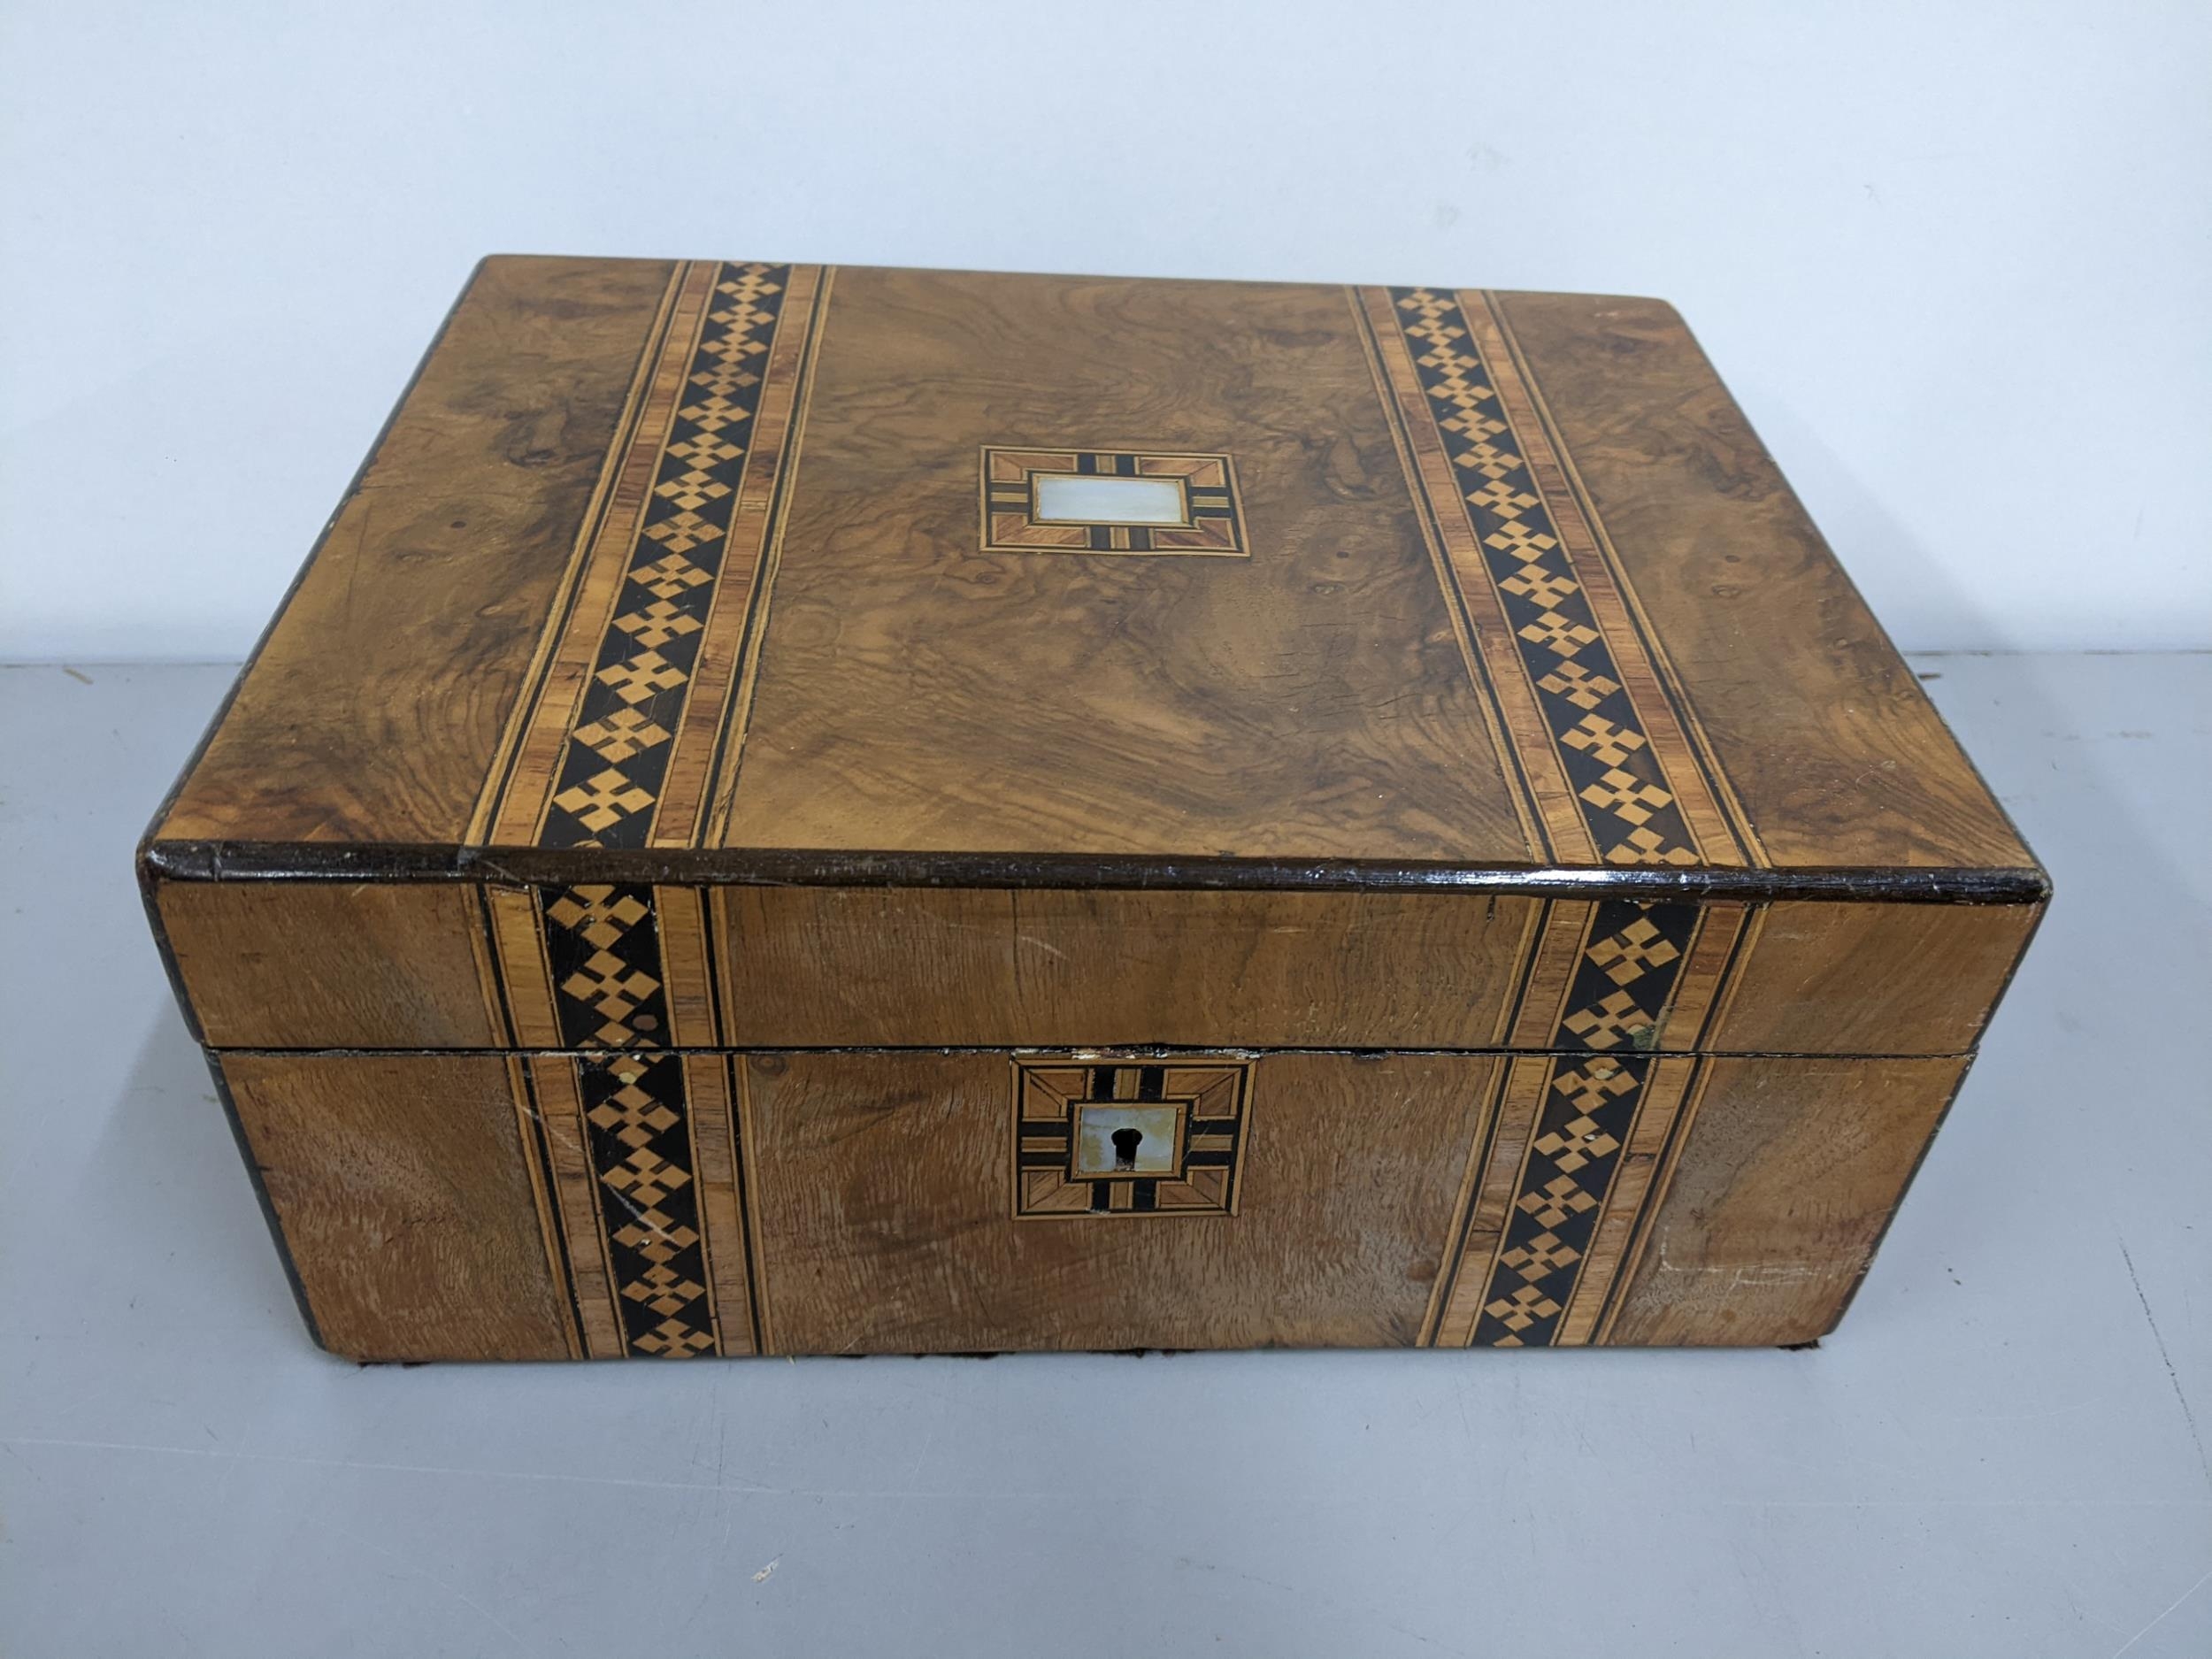 A Victorian walnut Tunbridge ware box having parquetry inlaid and inset with mother of pearl to